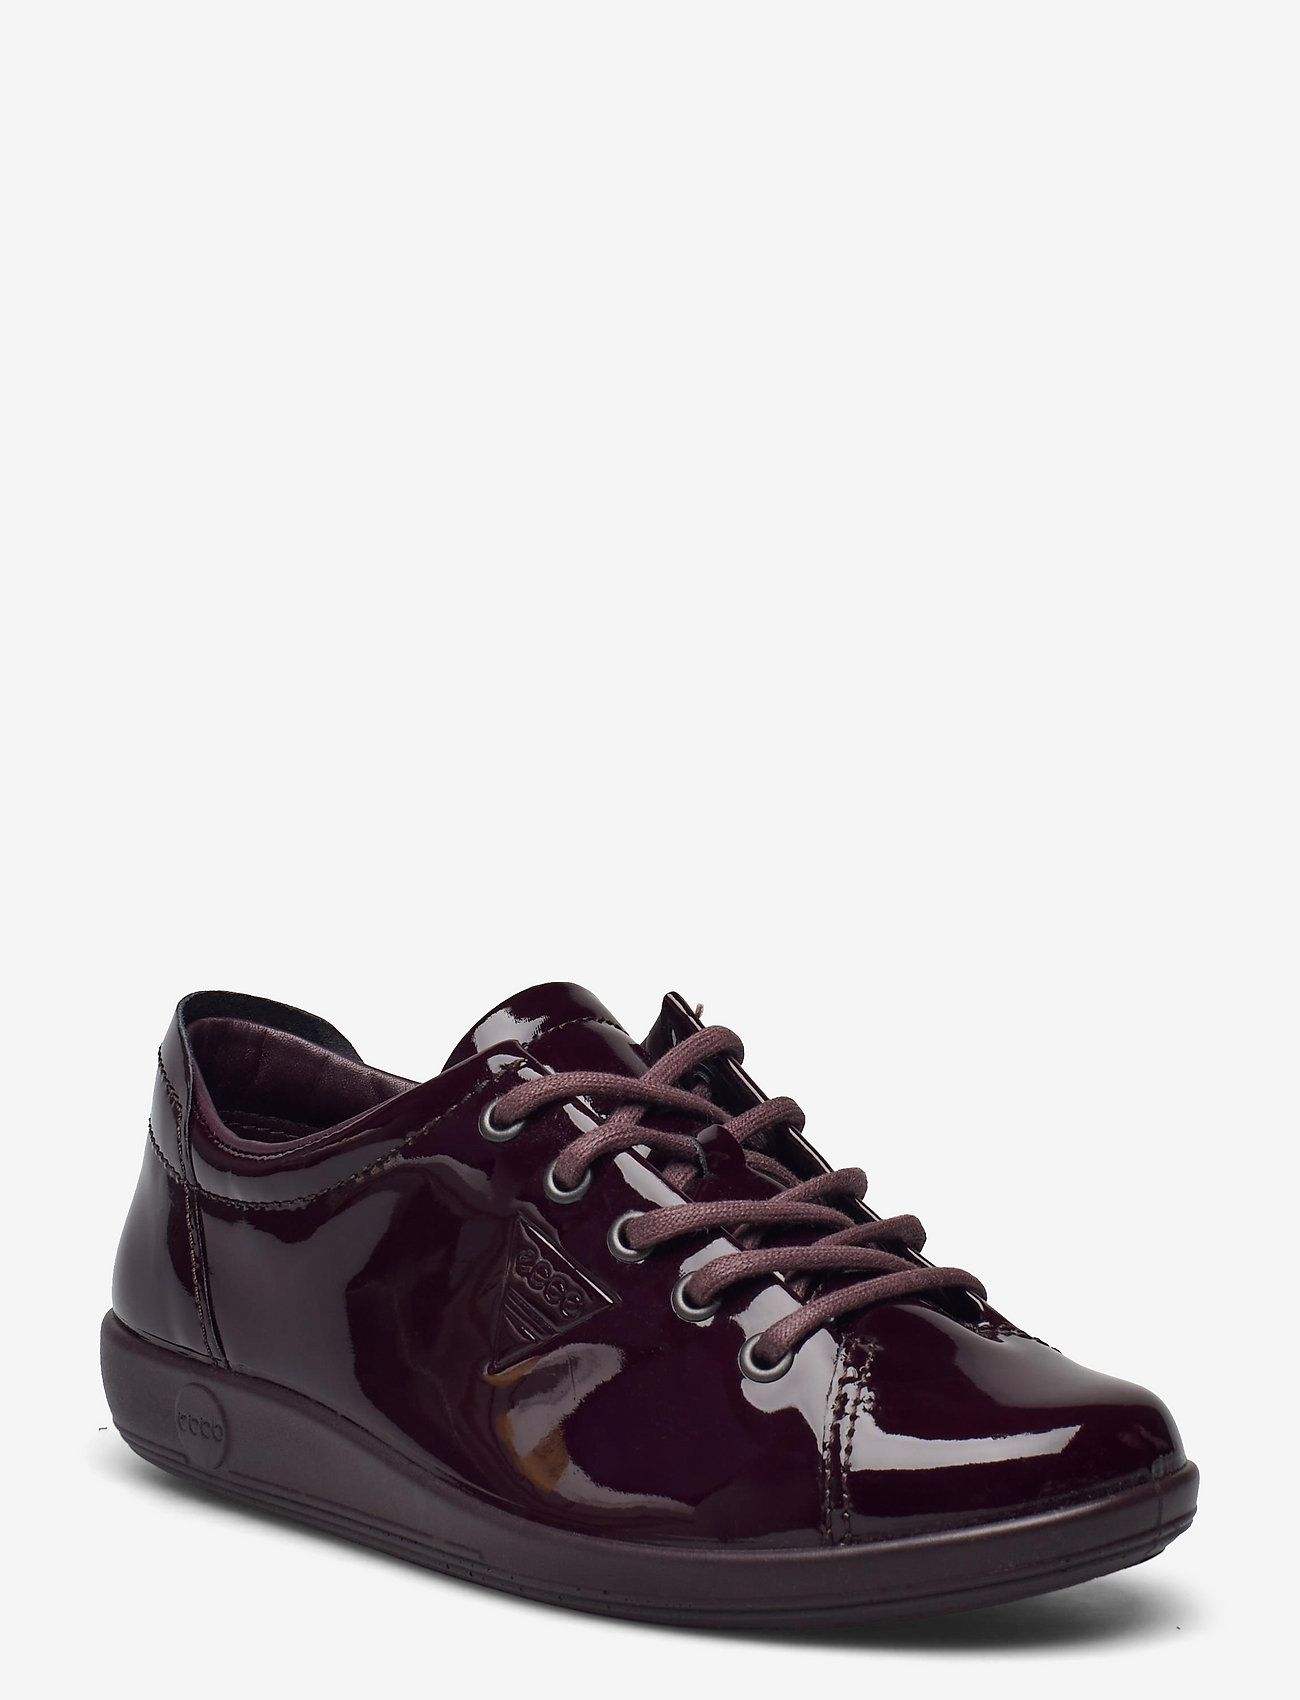 ECCO - SOFT 2.0 - low top sneakers - fig - 0